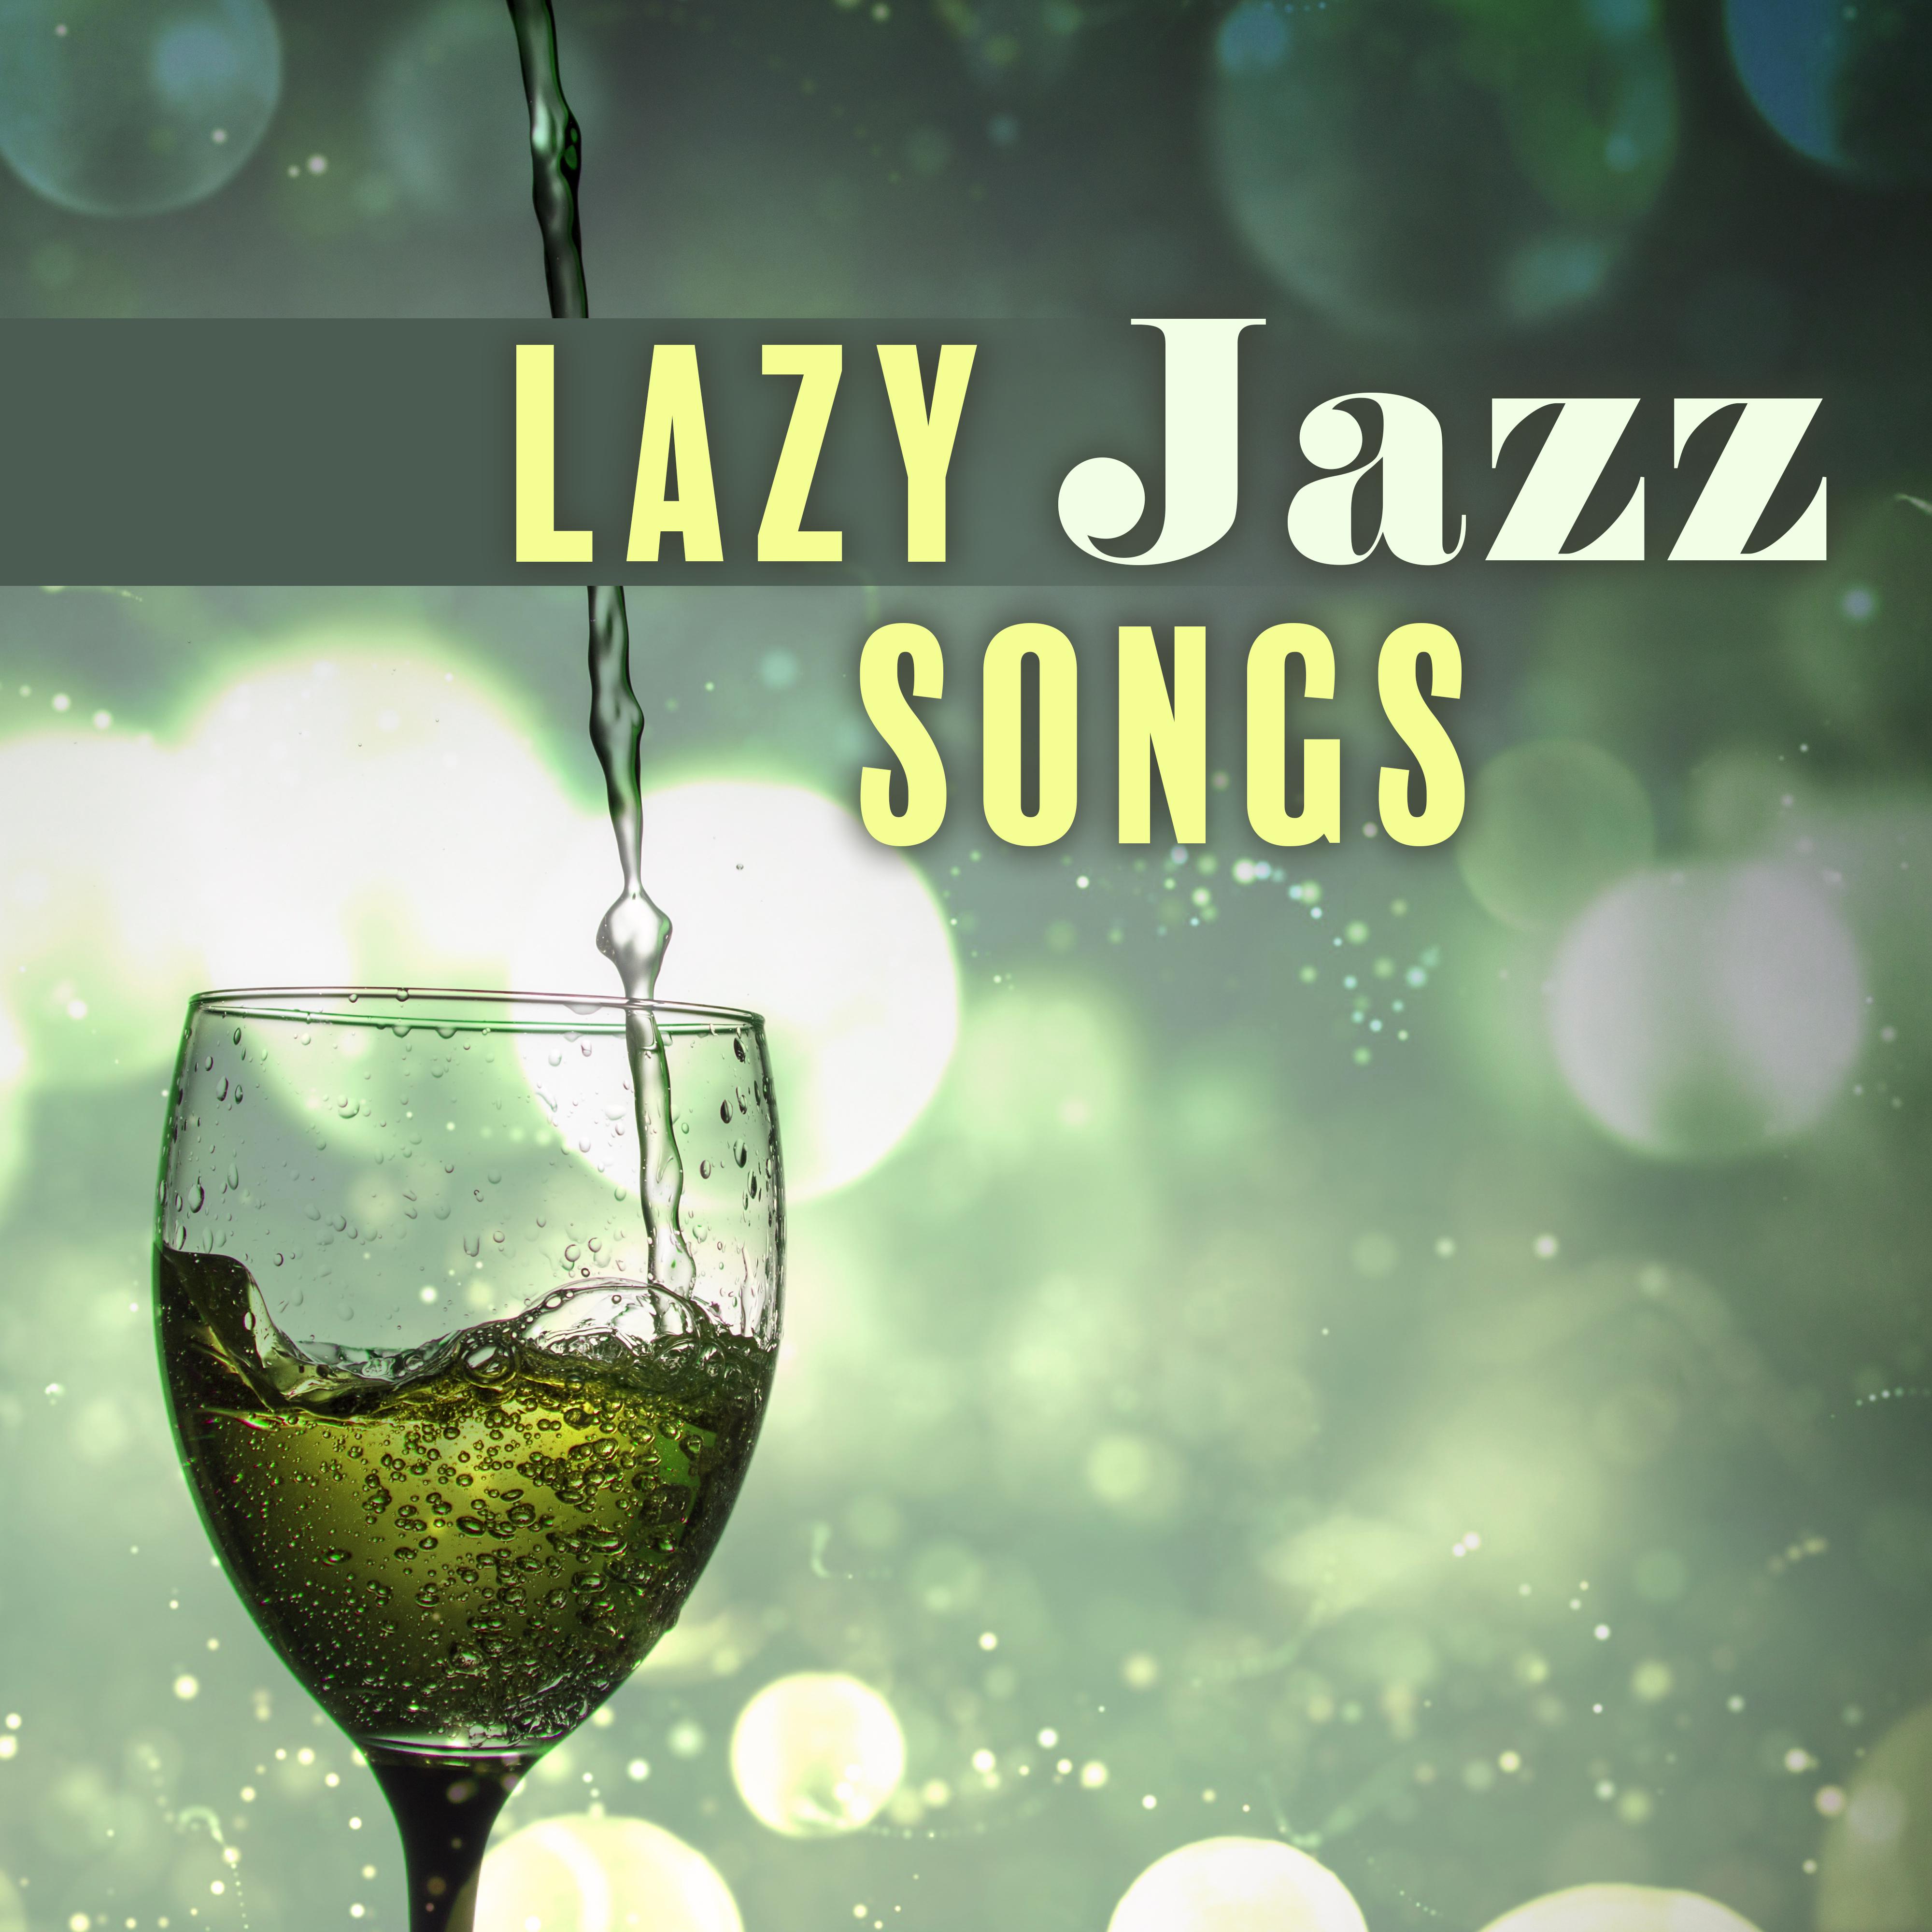 Lazy Jazz Songs  Peaceful Piano Melodies, Instrumental Music, Relaxing Jazz, Easy Listening